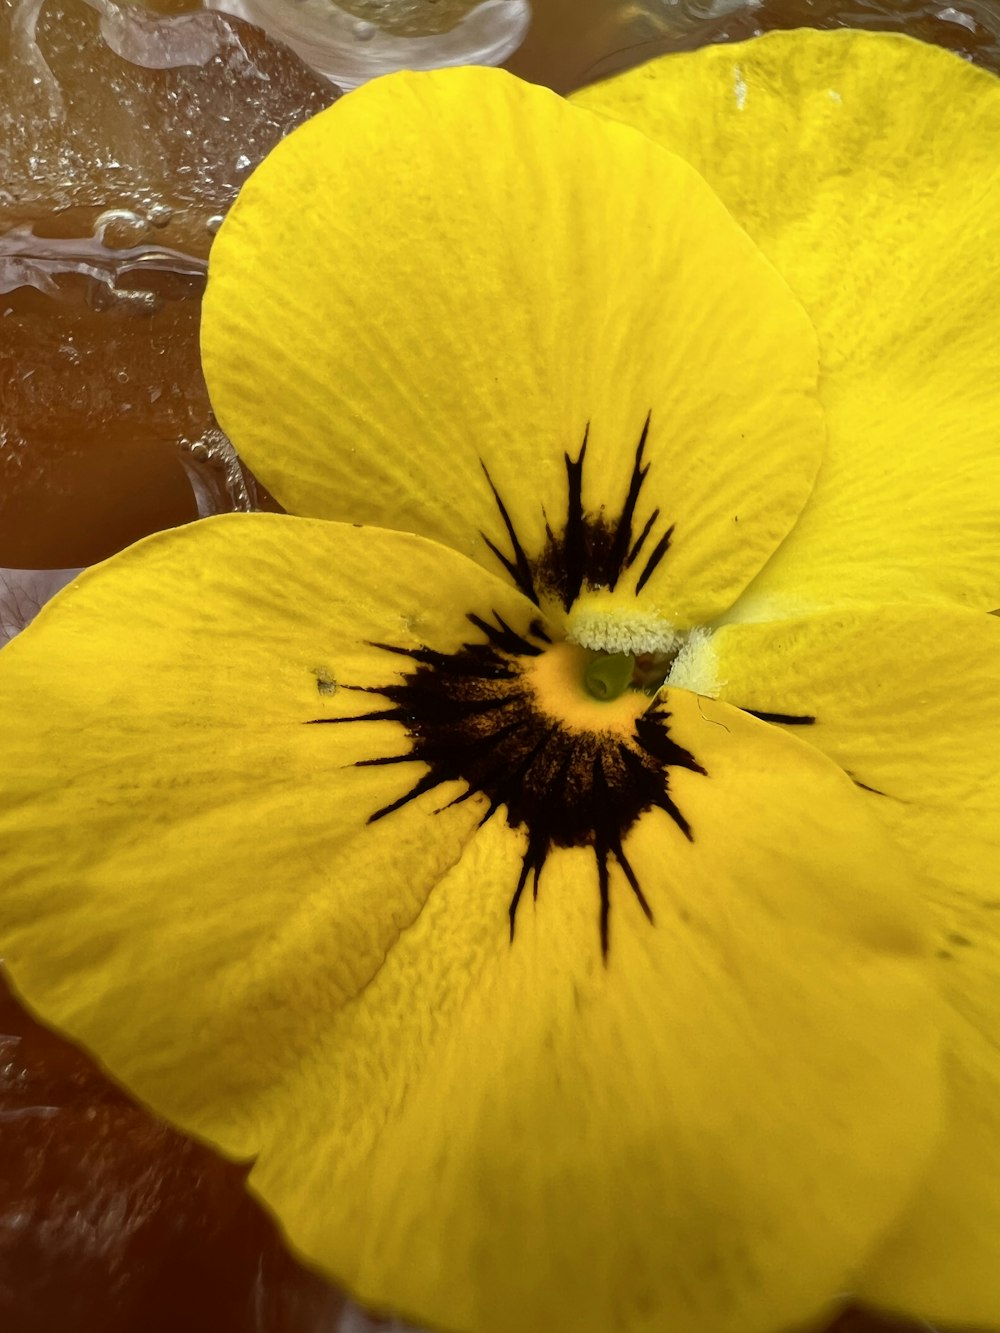 a close up of a yellow flower on ice